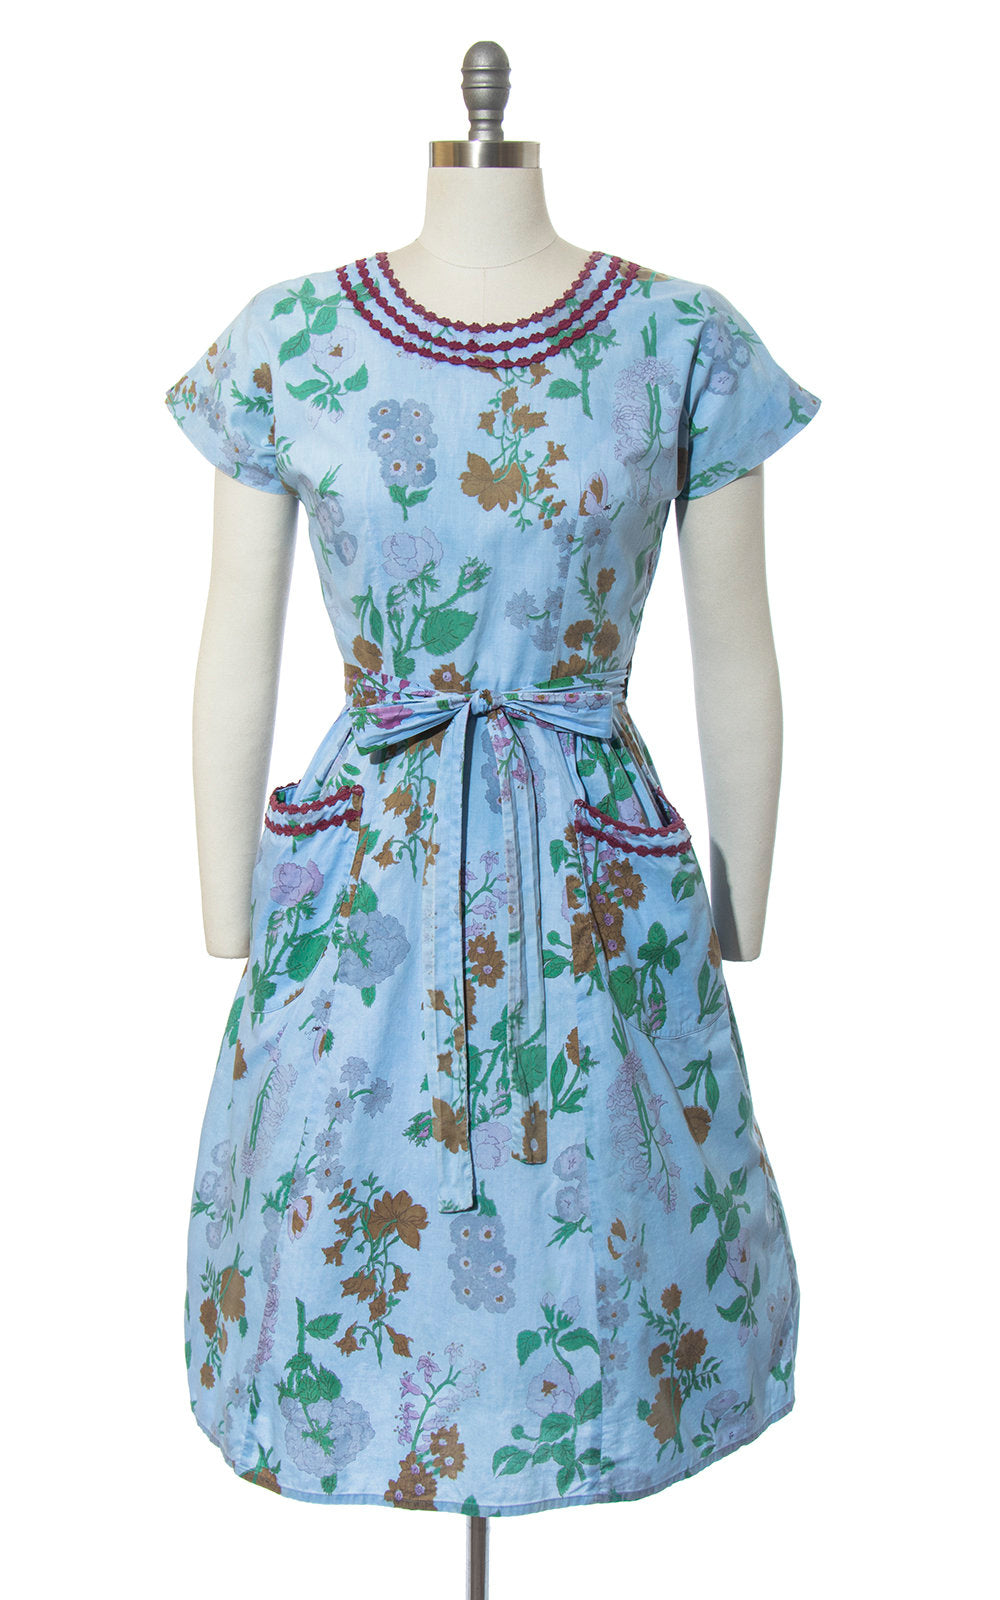 Vintage 1950s Dress | 50s SWIRL Wrap Dress Floral Butterfly Print Cotton Blue Full Skirt Day Dress with Pockets (small/medium)